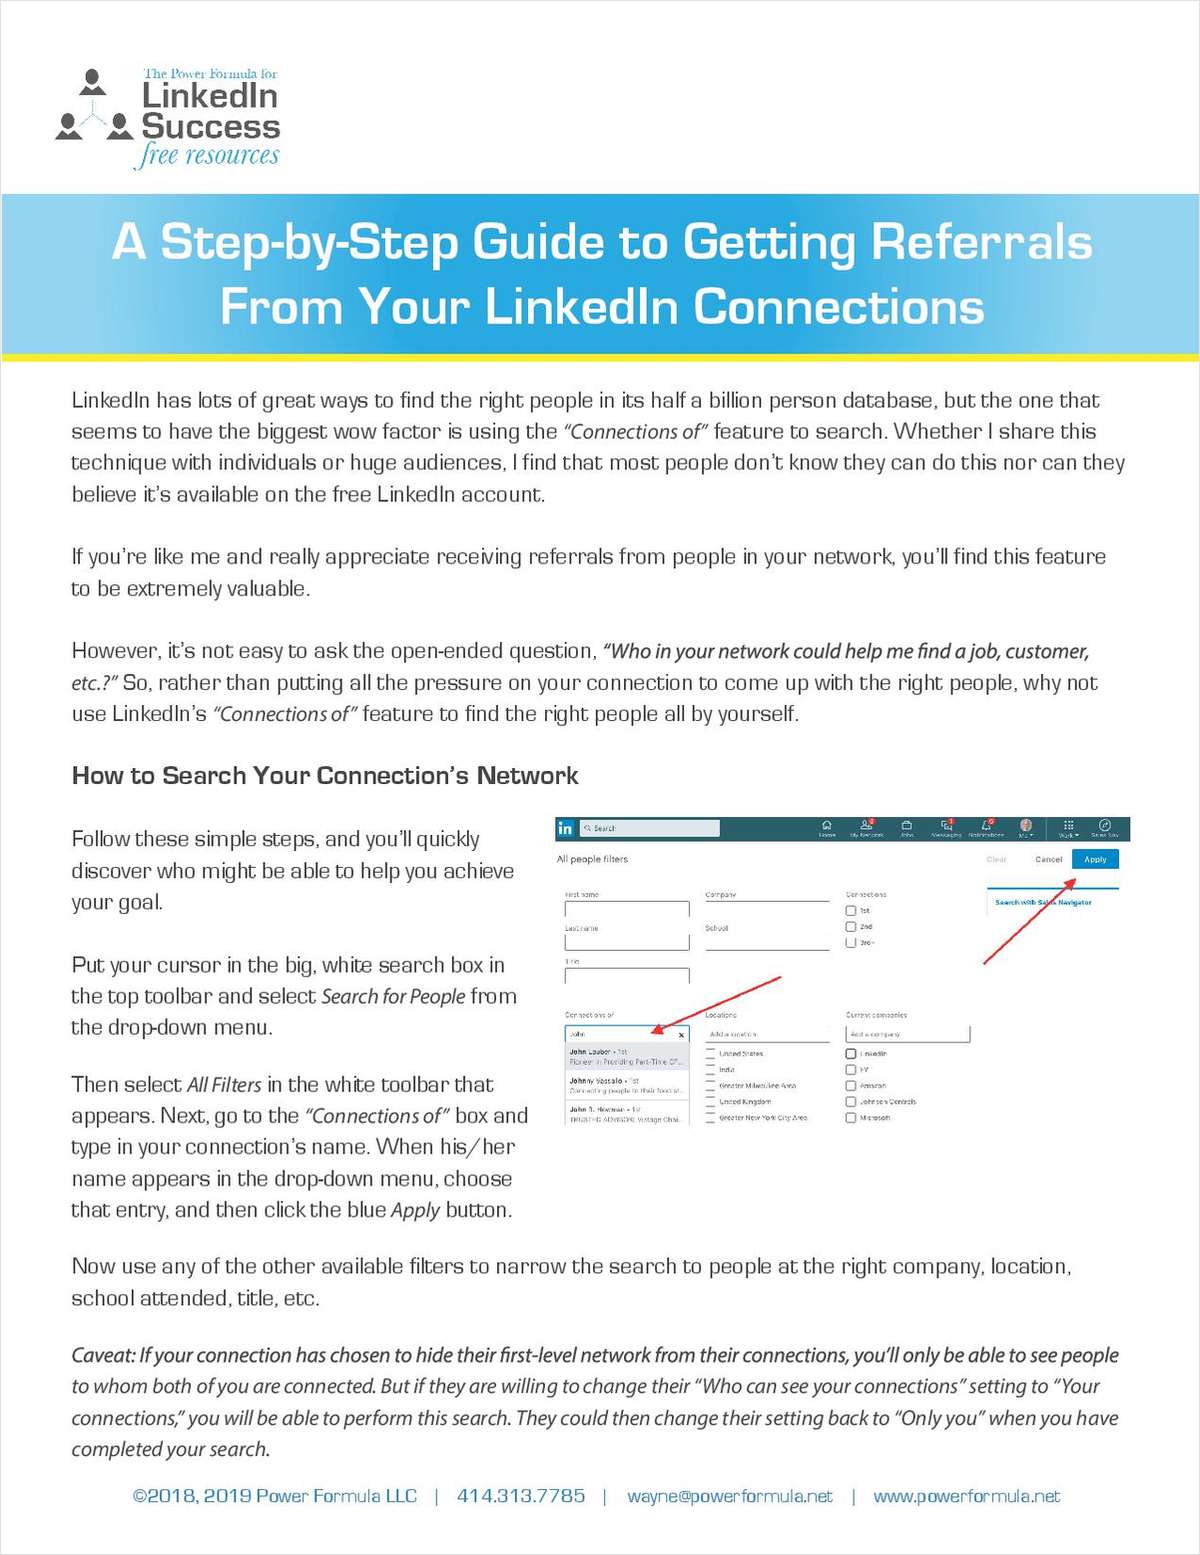 A Step-by-Step Guide to Getting Referrals From Your LinkedIn Connections